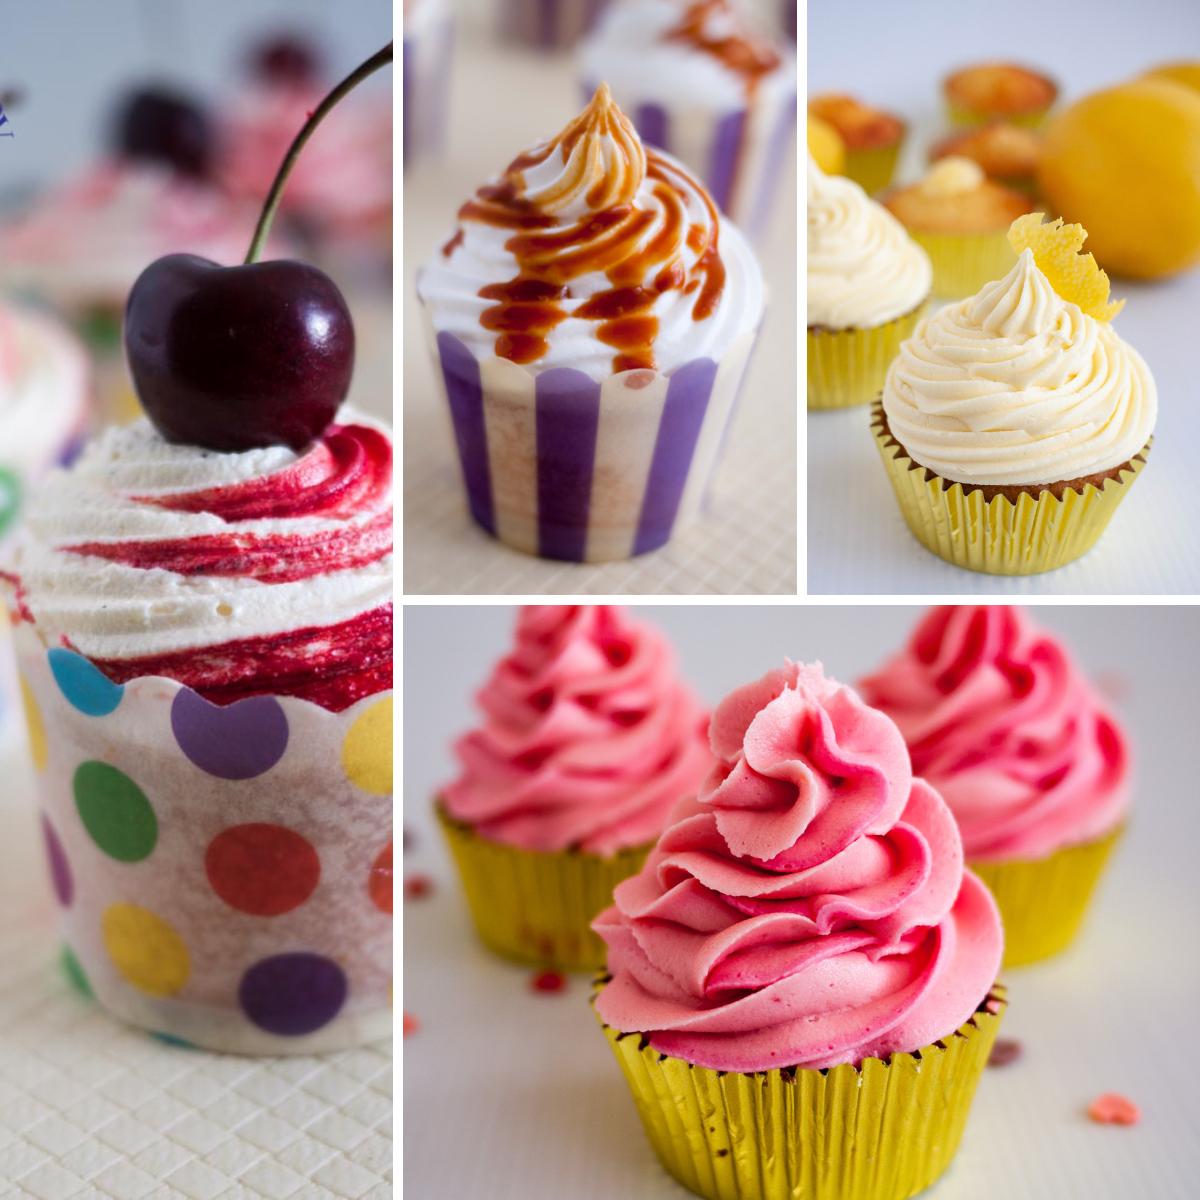 The 8 Best Cupcake Carriers